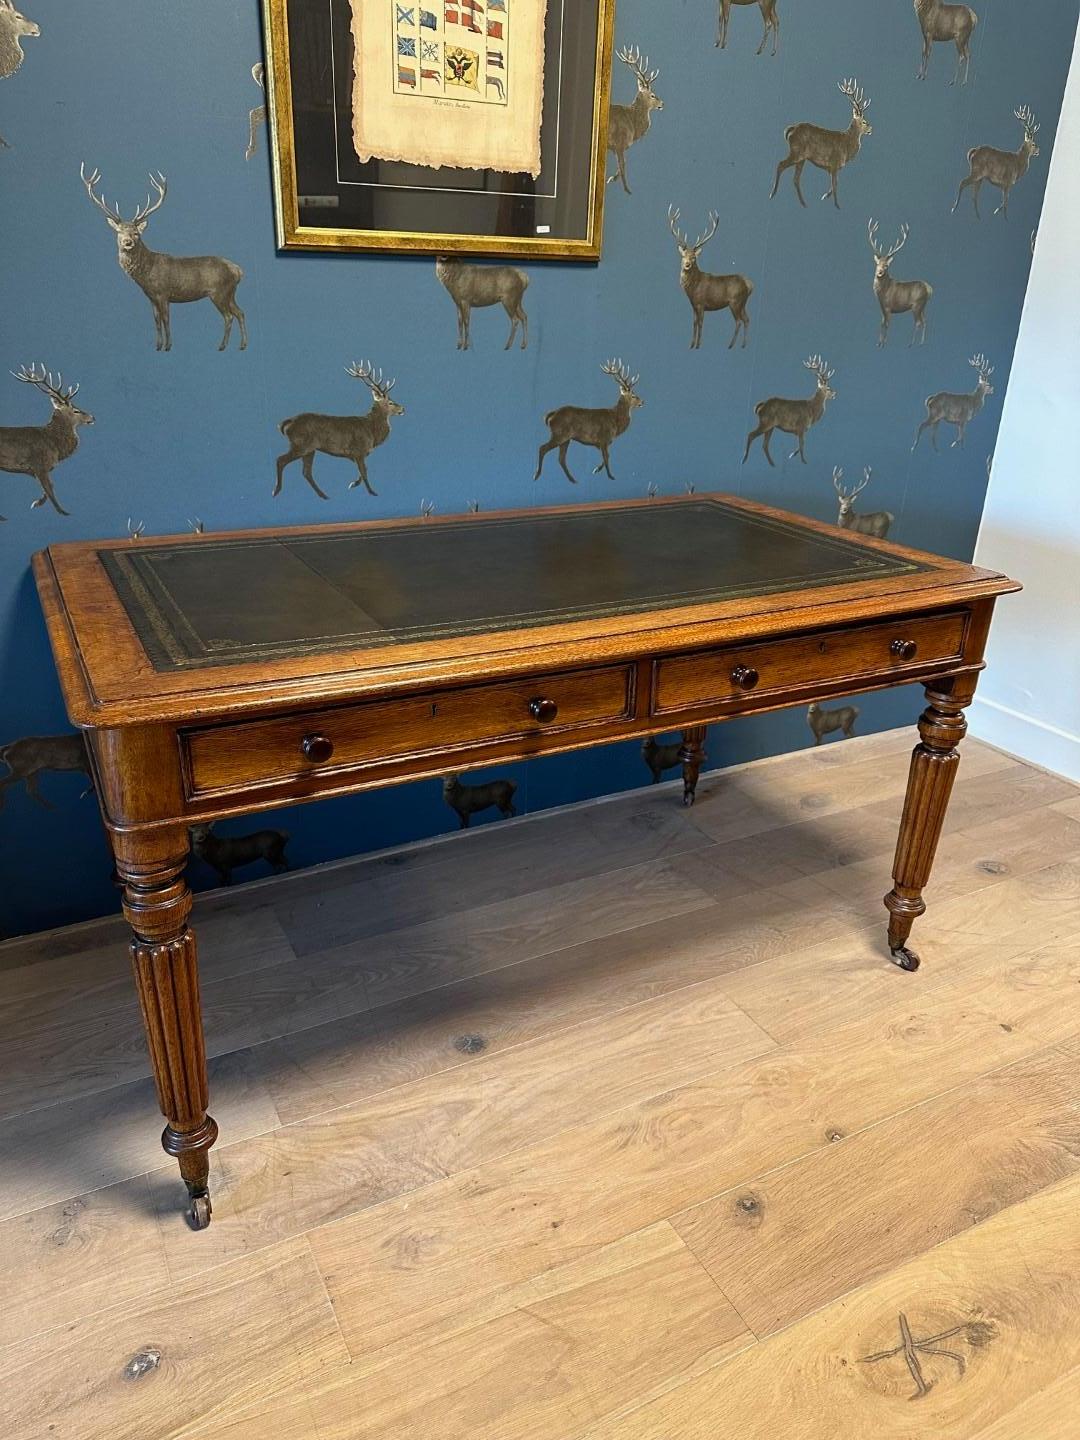 Beautiful antique English oak writing table with green leather and 2 drawers. The table is on porcelain wheels. The table is finished all around and can therefore stand freely in the room. Completely in good and original condition.

Origin: